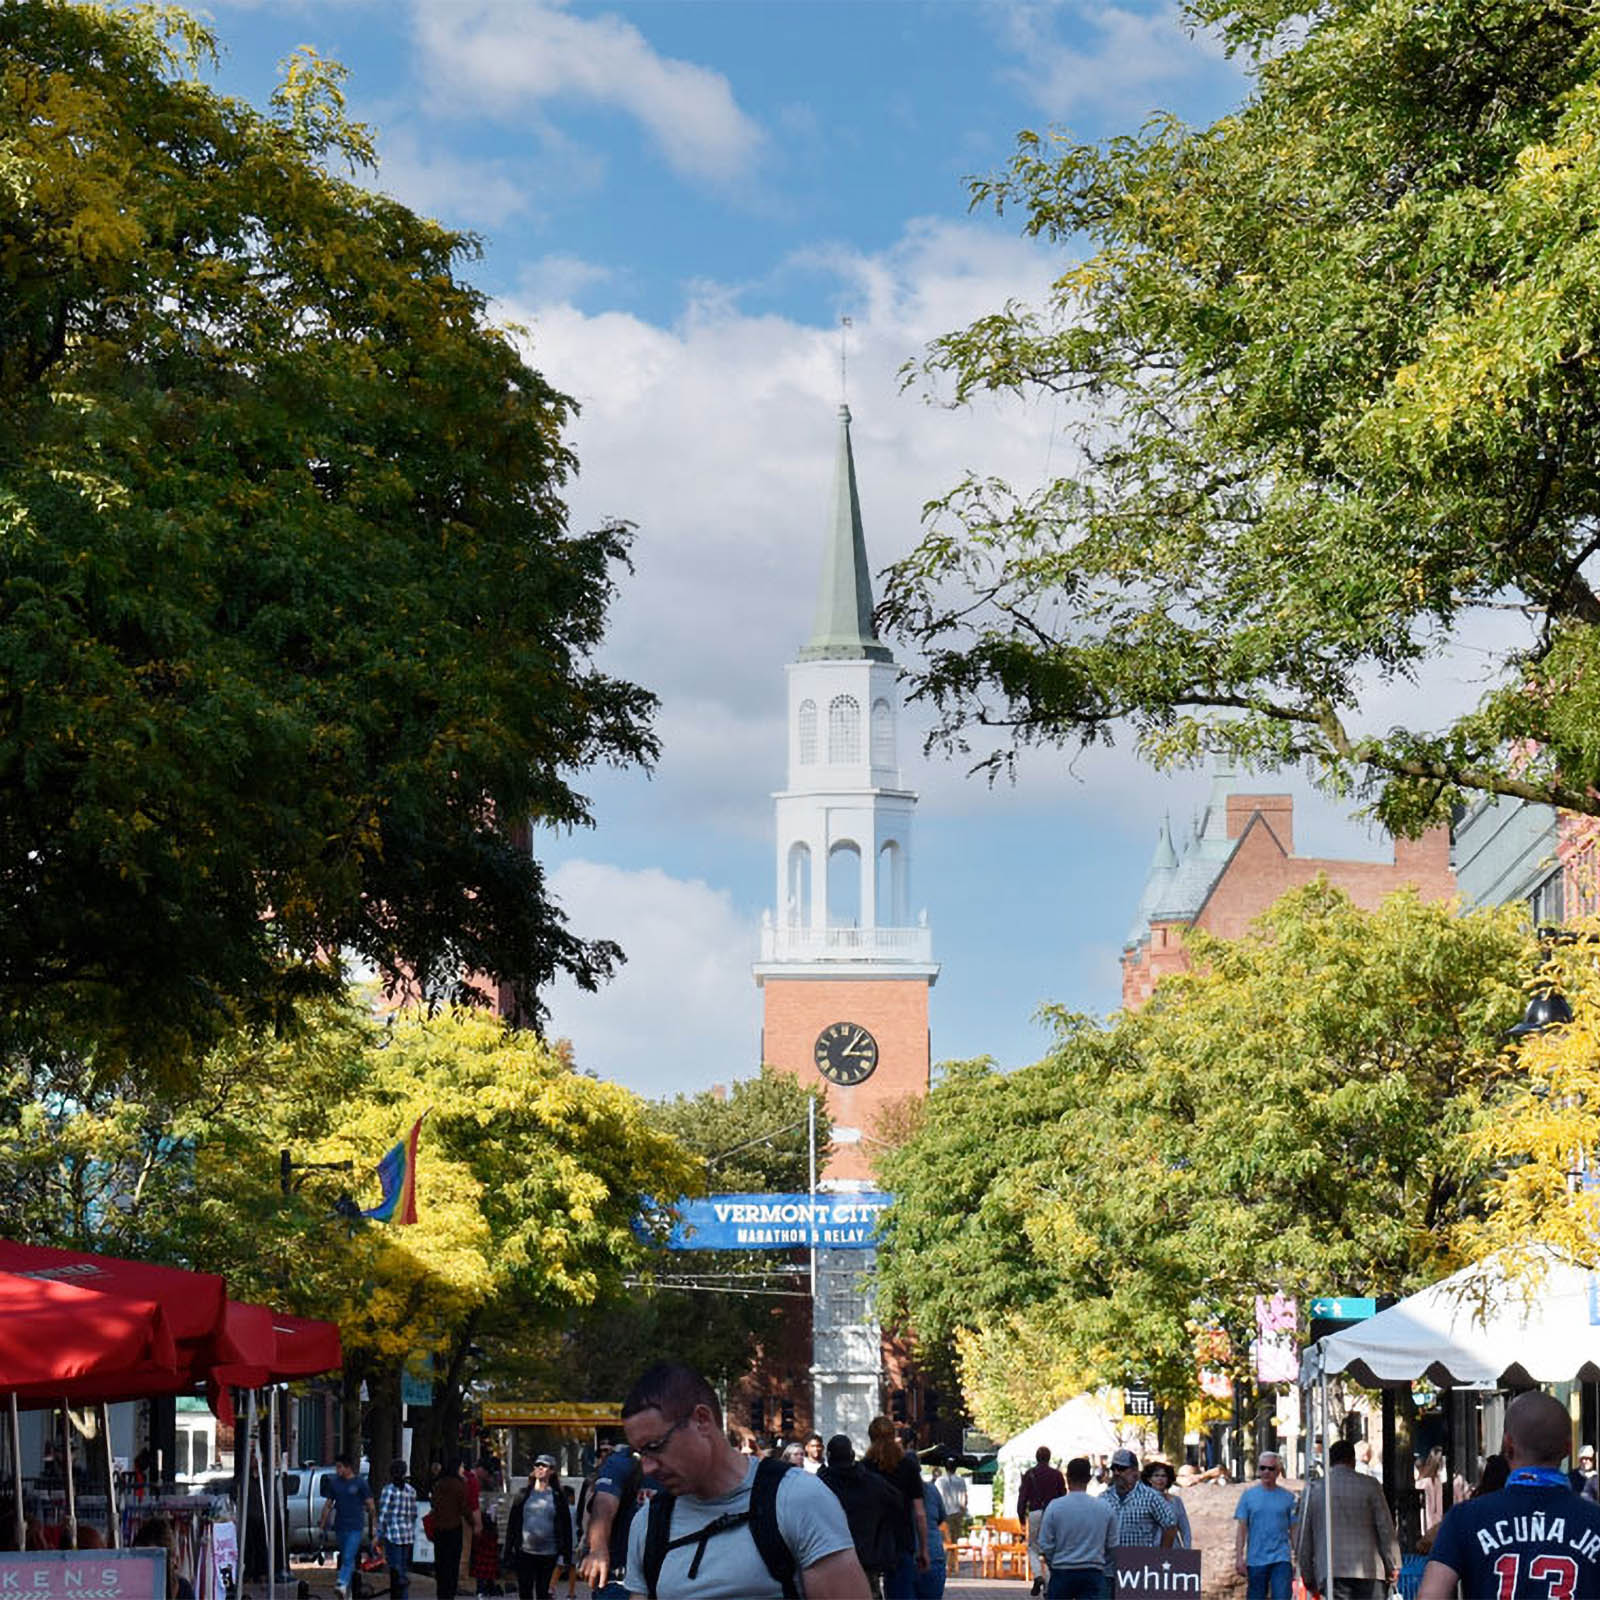 a church steeple rises above the crowd on church street in burlington, vermont